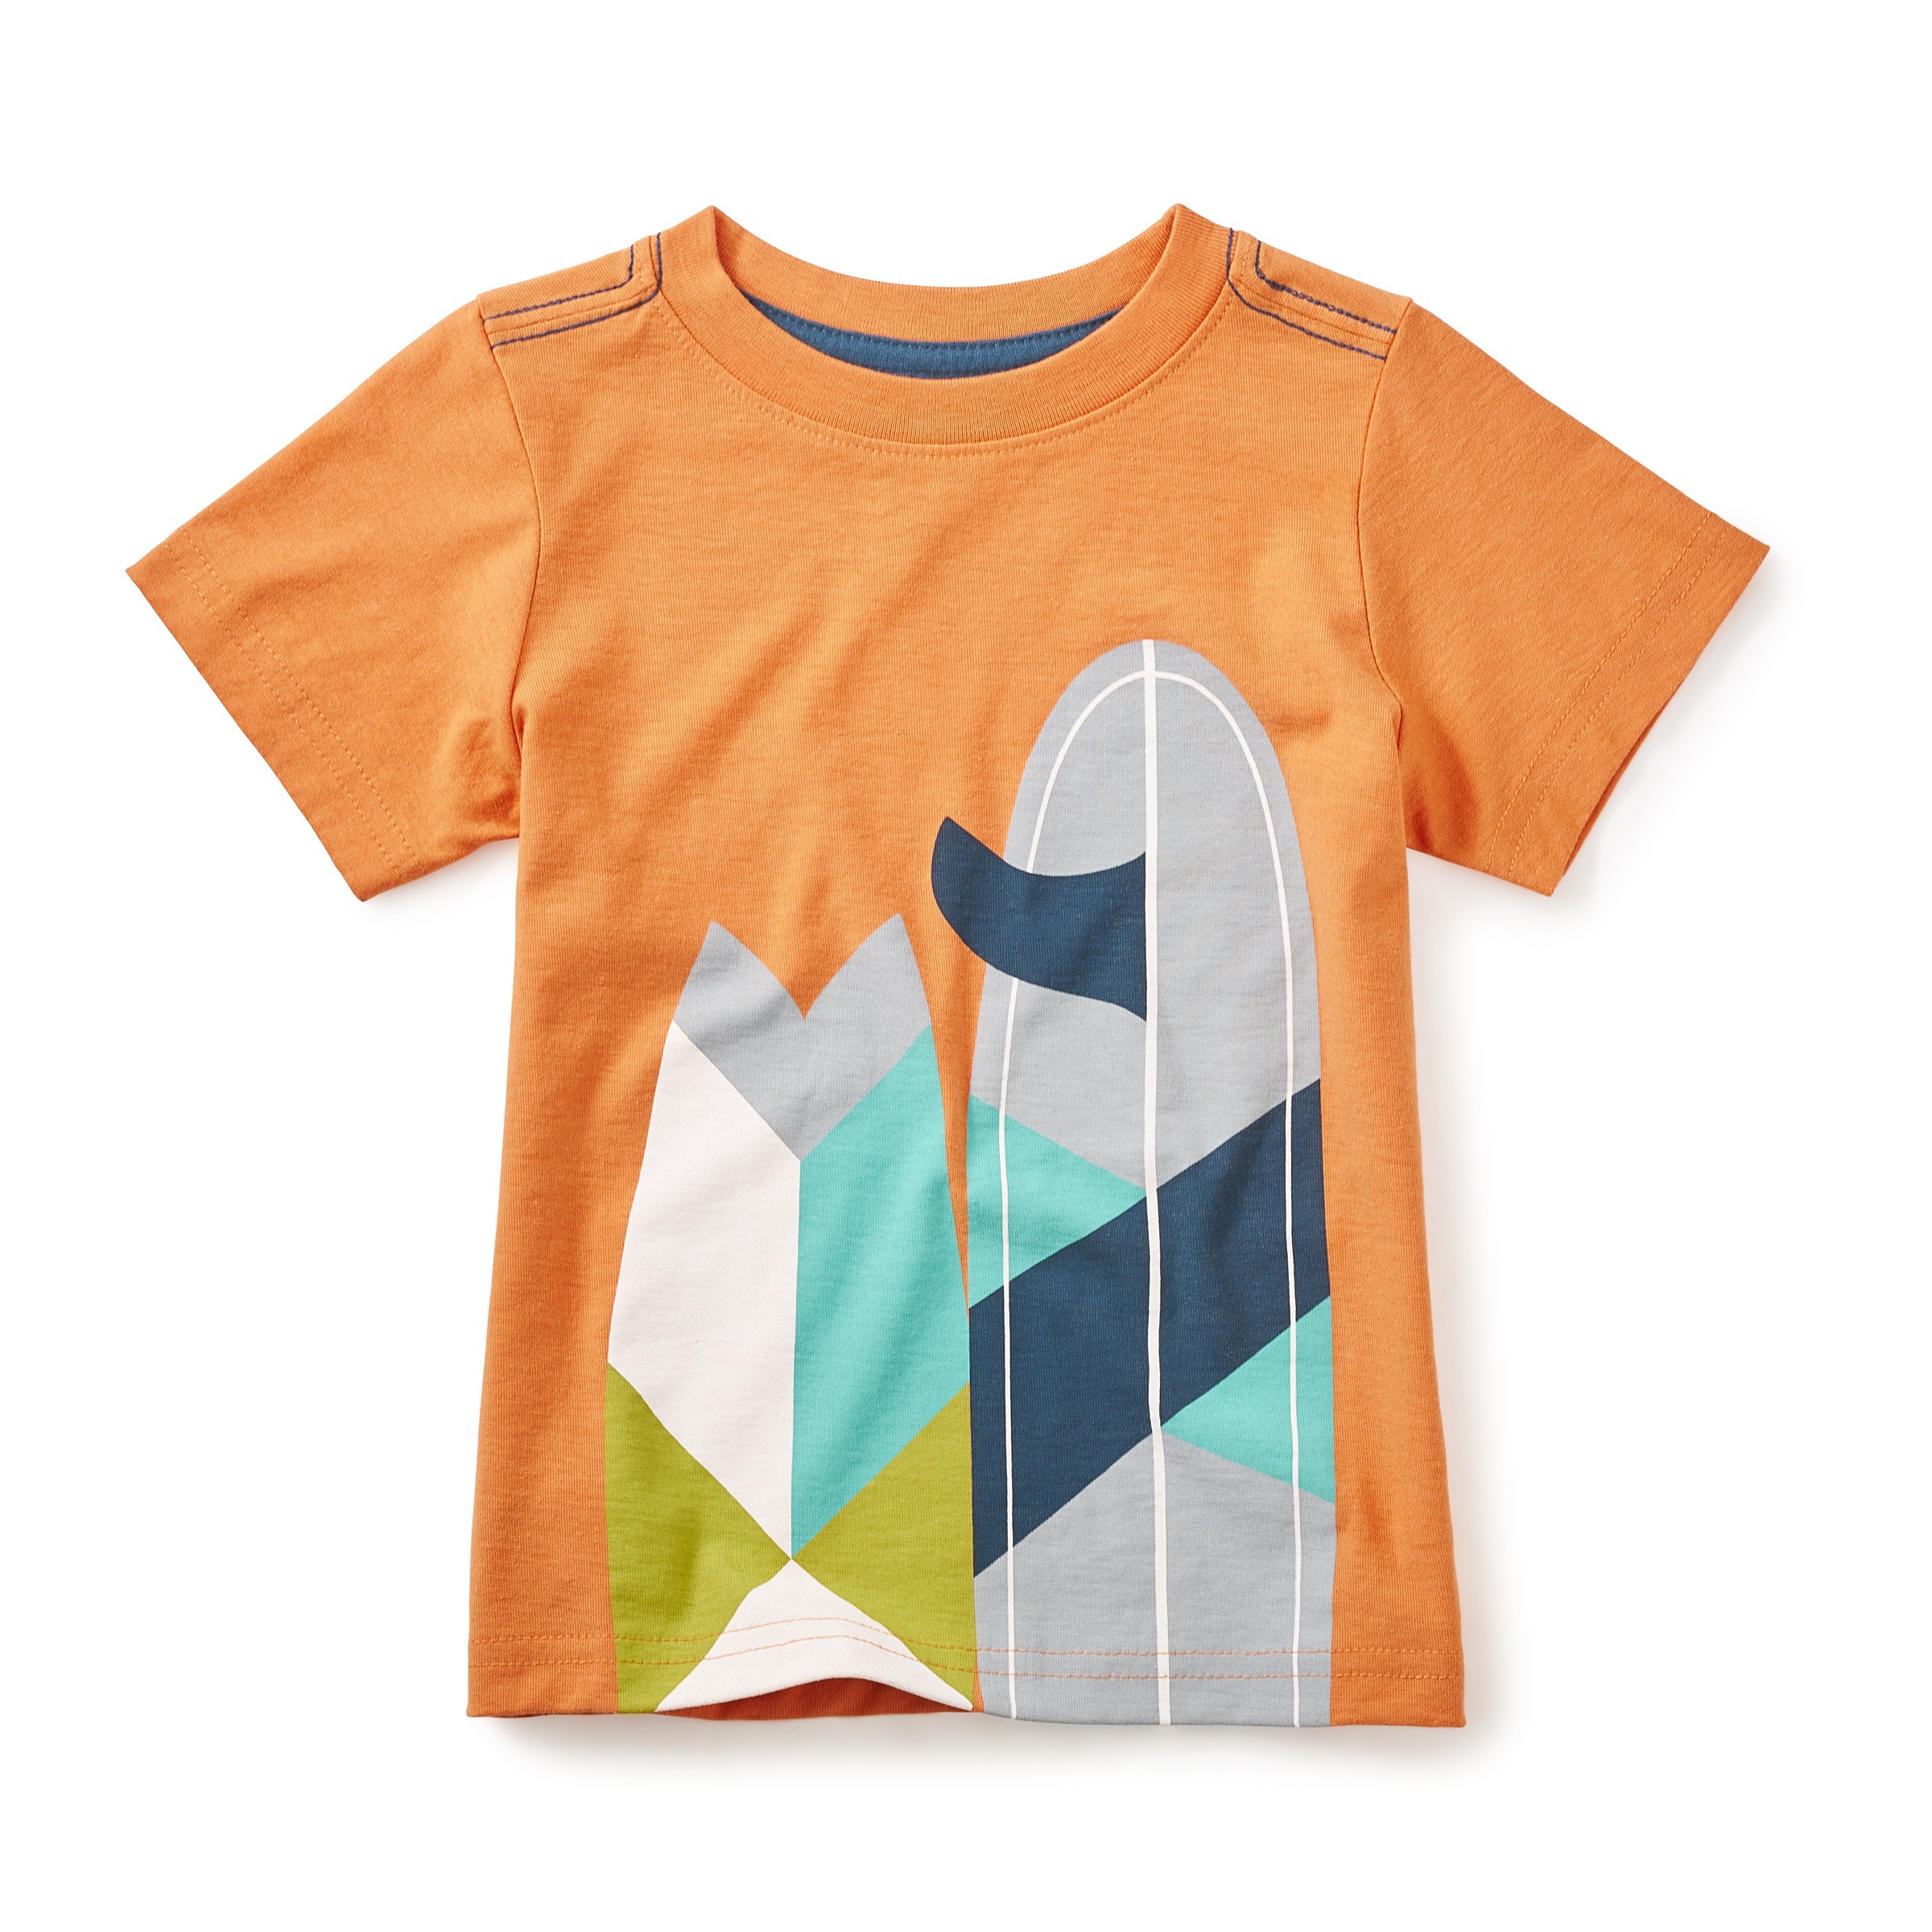 Soul Surfer Graphic Tee | Tea Collection